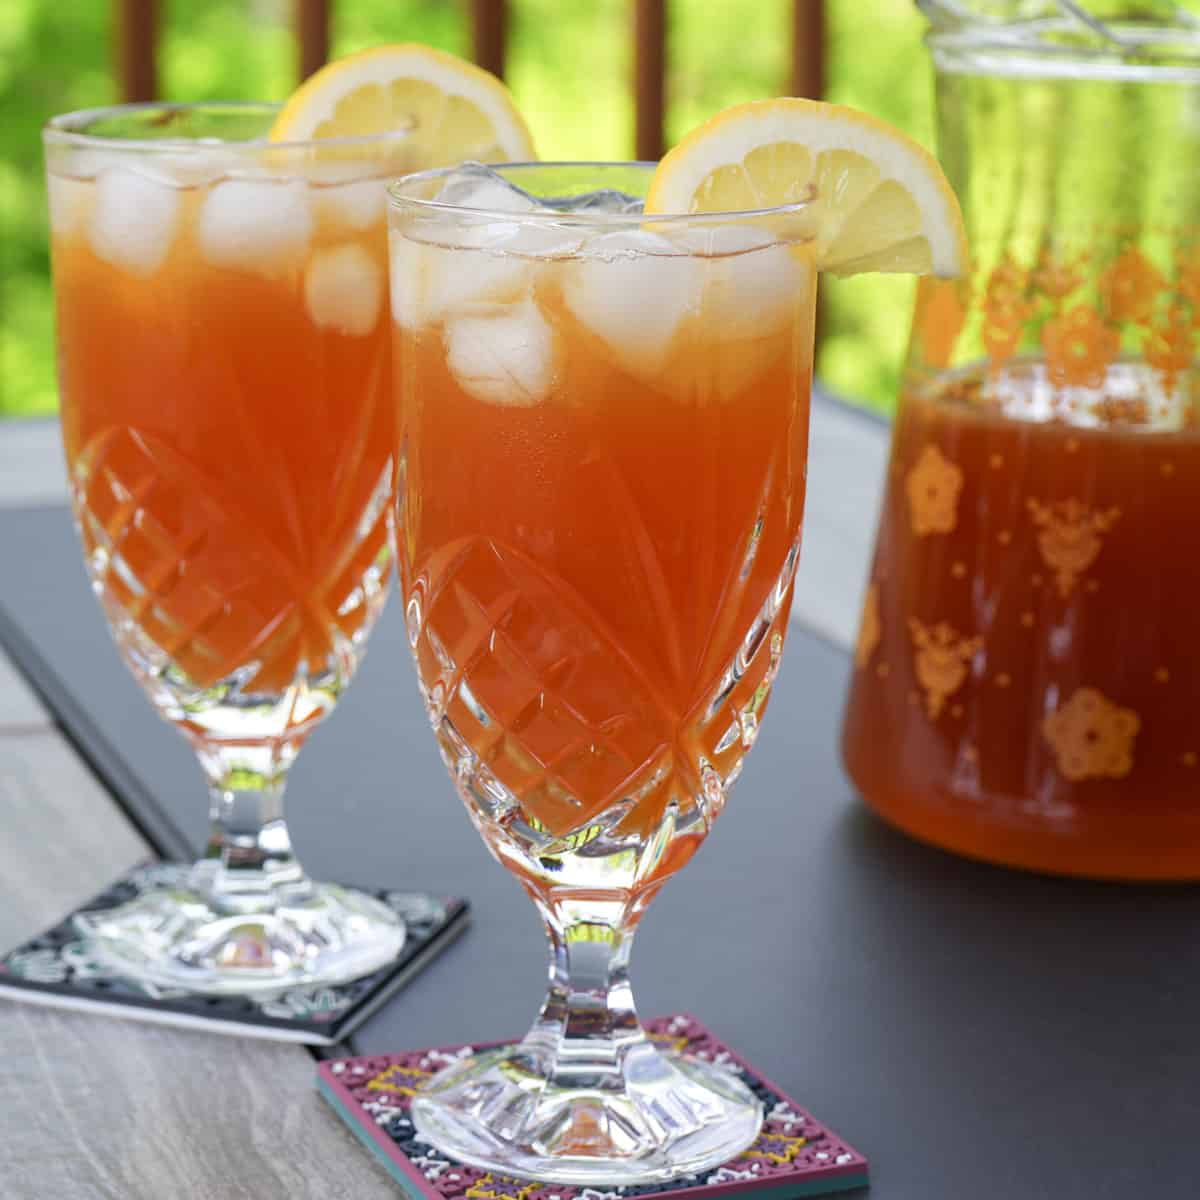 two crystal glasses of lemonade iced tea with lemon garnish and tea pitcher in background.